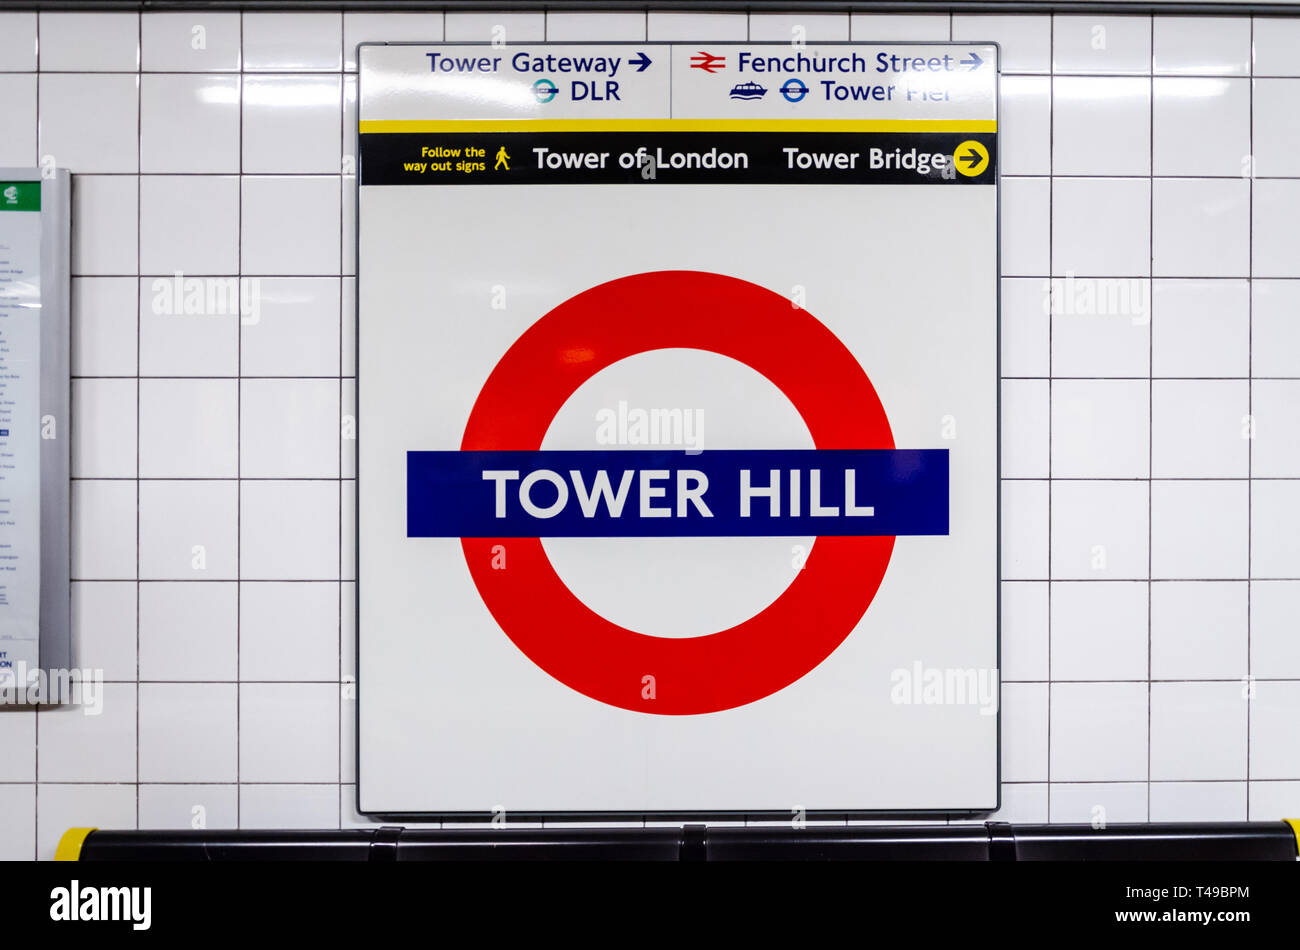 Tower Hill London Underground Railway Station name sign. Stock Photo